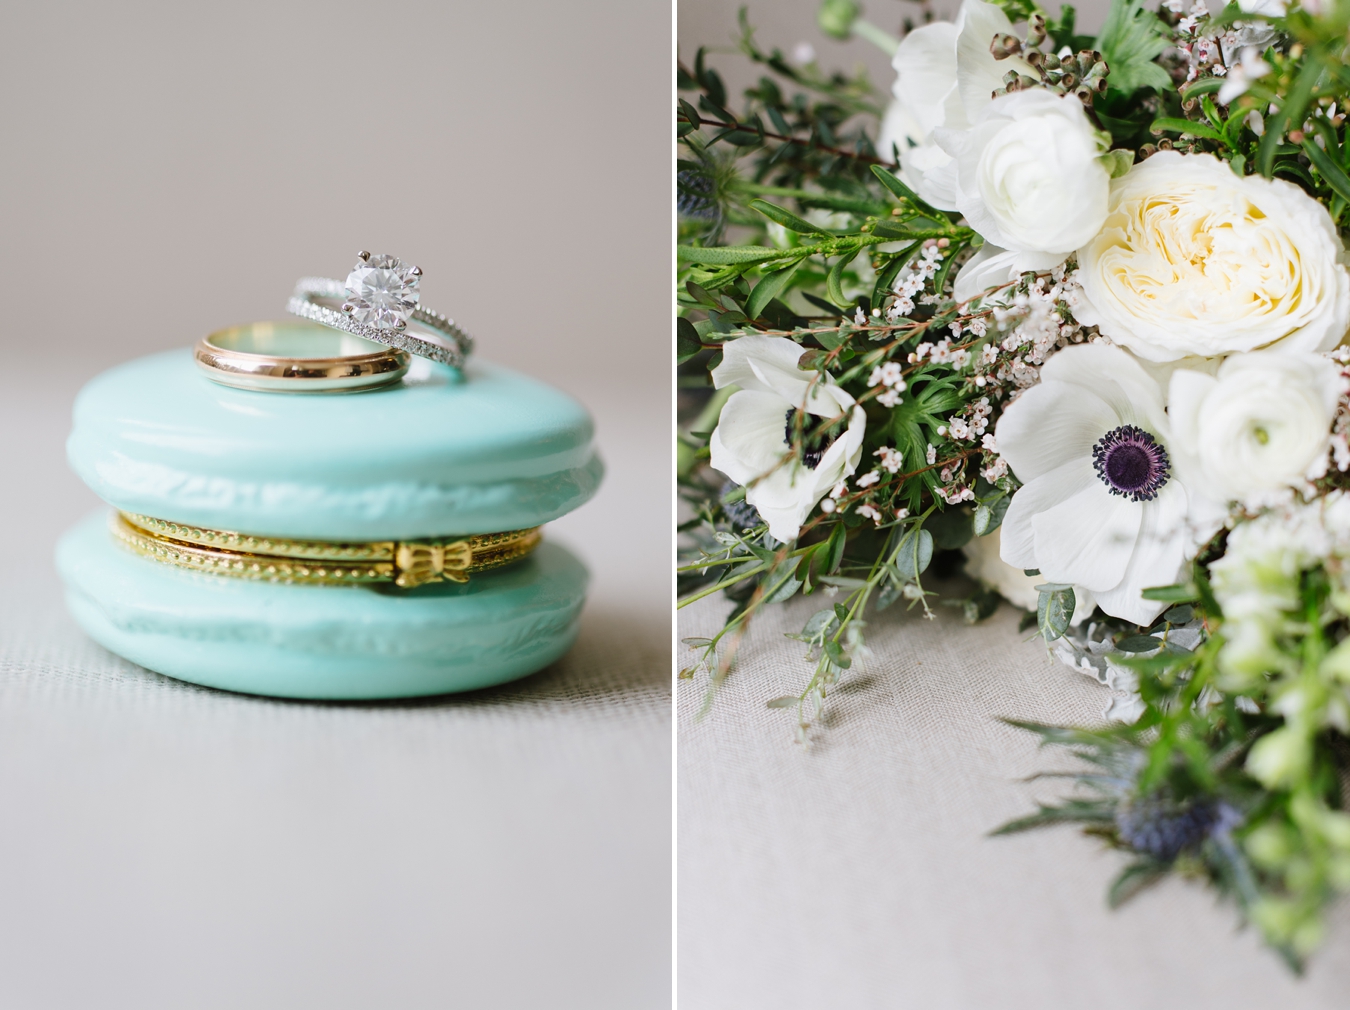 Macaron Jewelry Holder with Romantic Wedding Bouquet in Annapolis by Natalie Franke Photography.